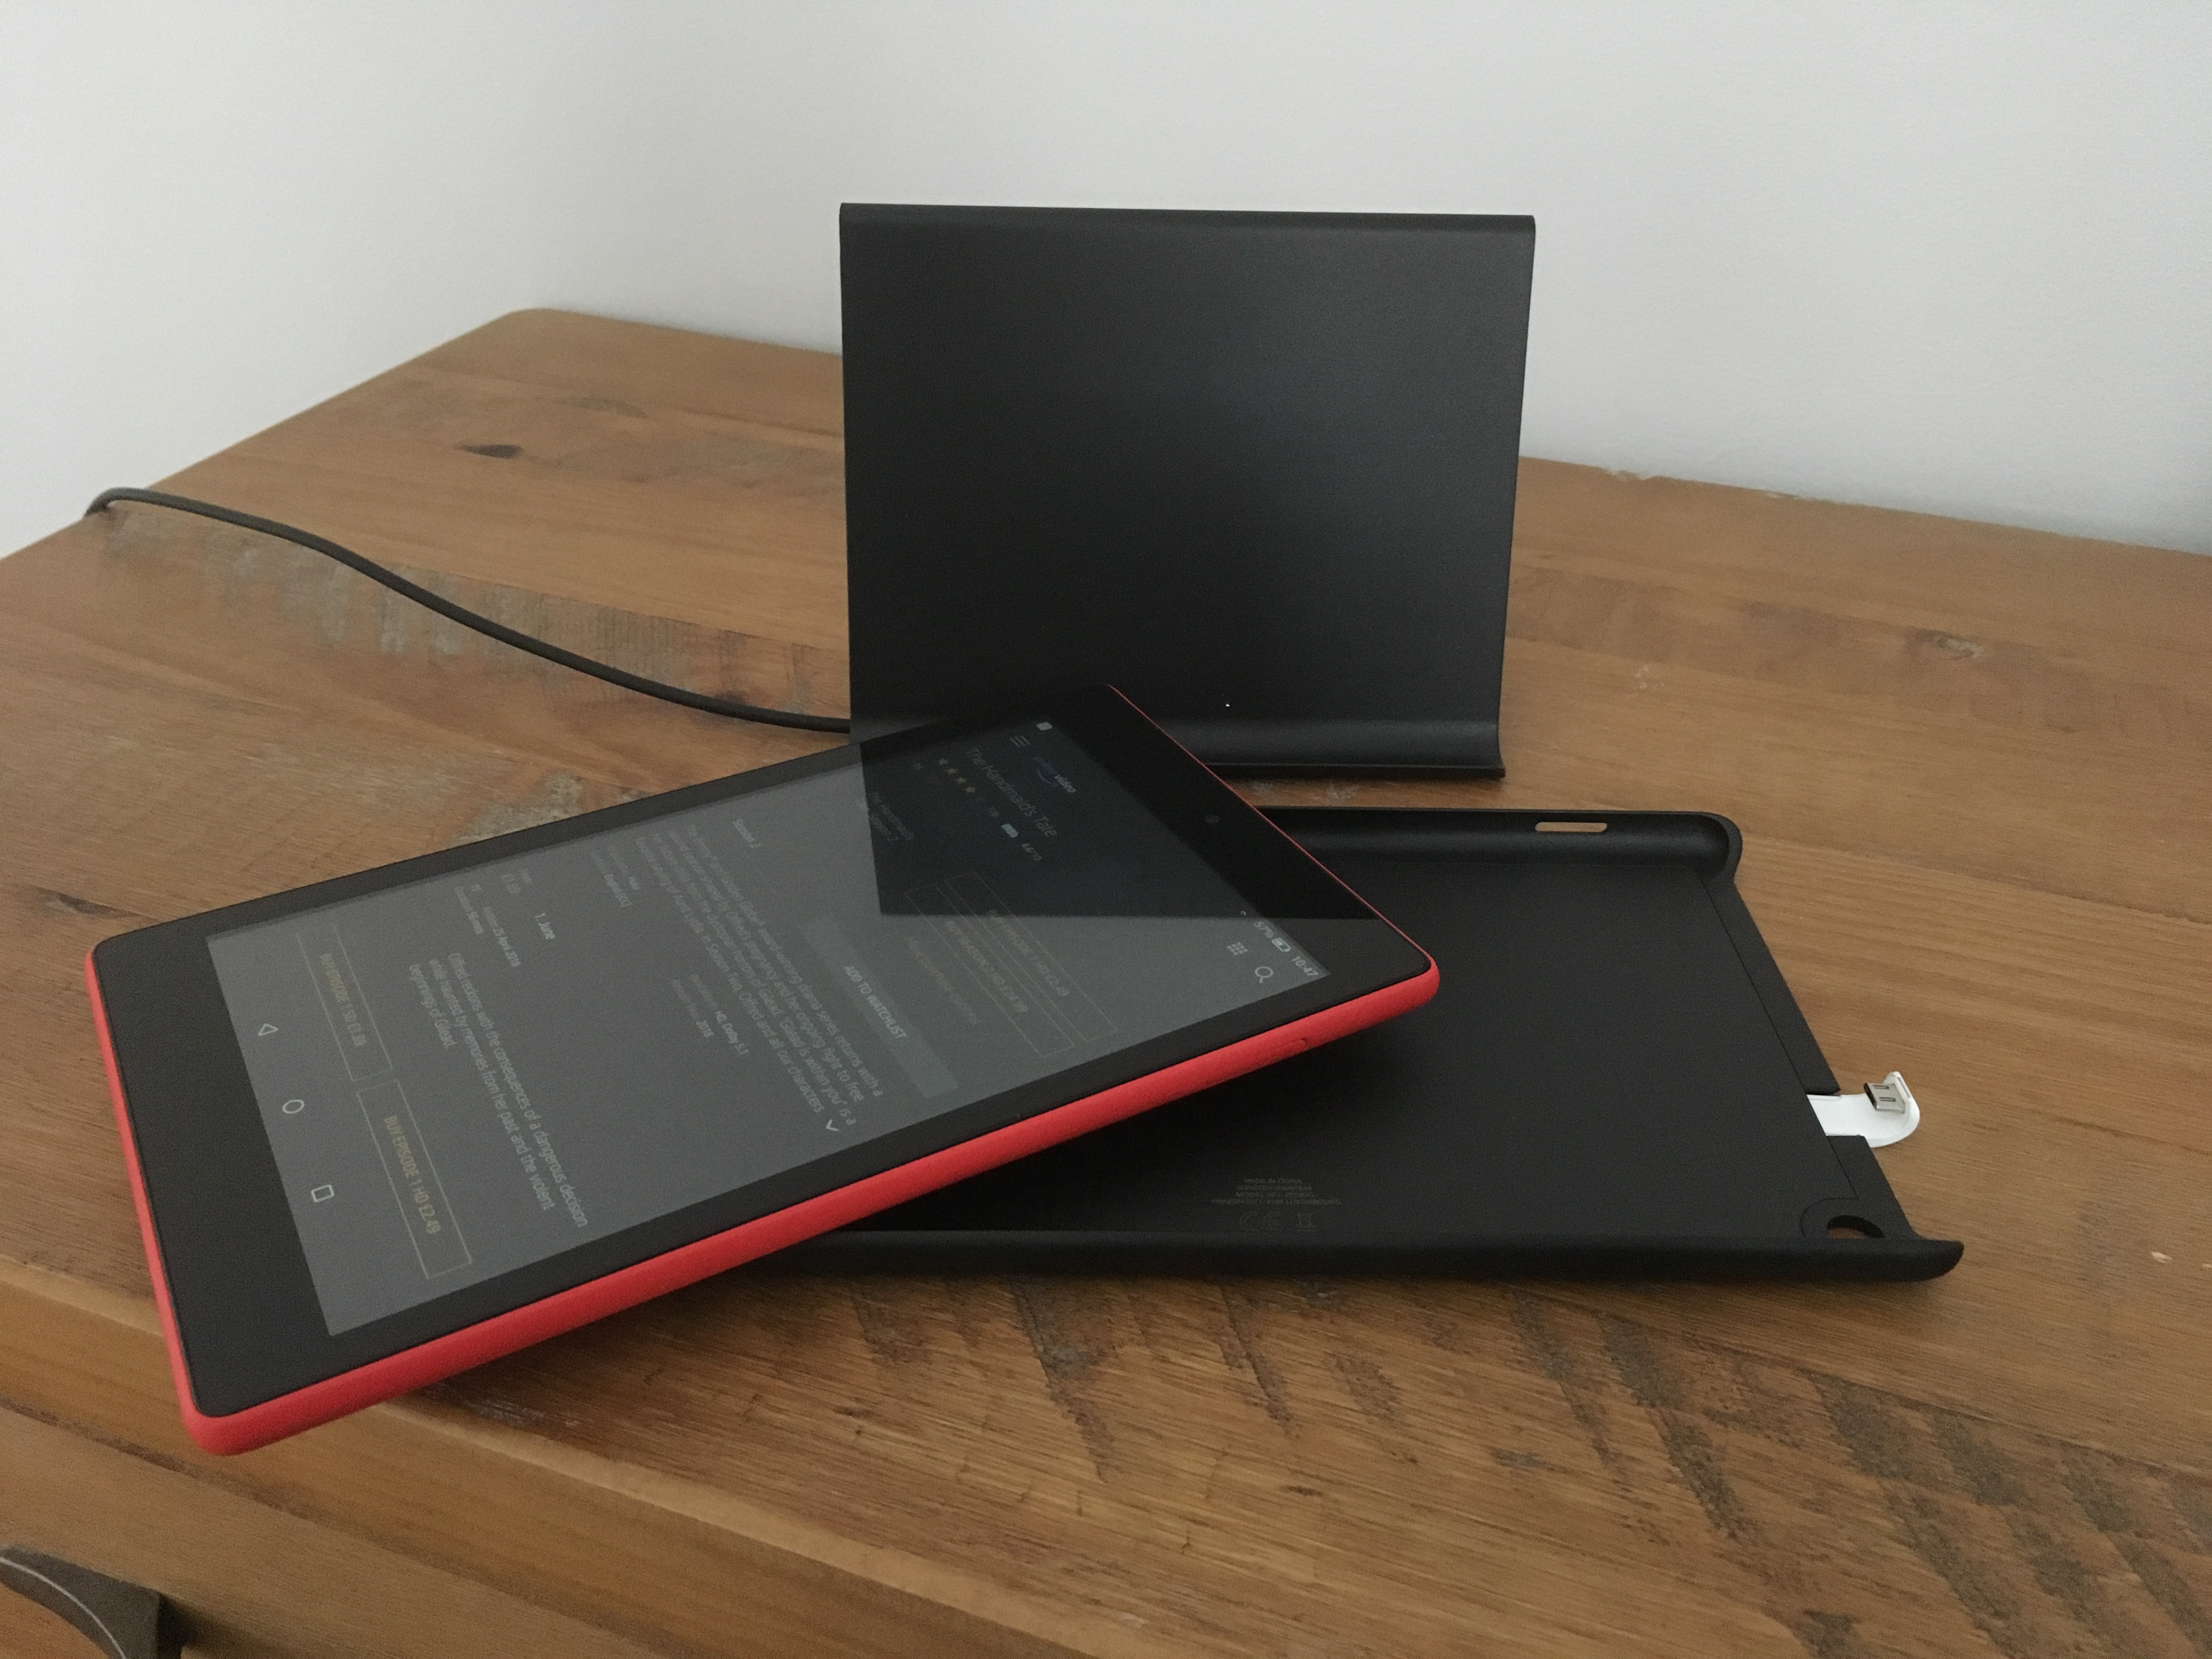 Amazon Fire HD 8 Performance and battery life: More of a slow burn